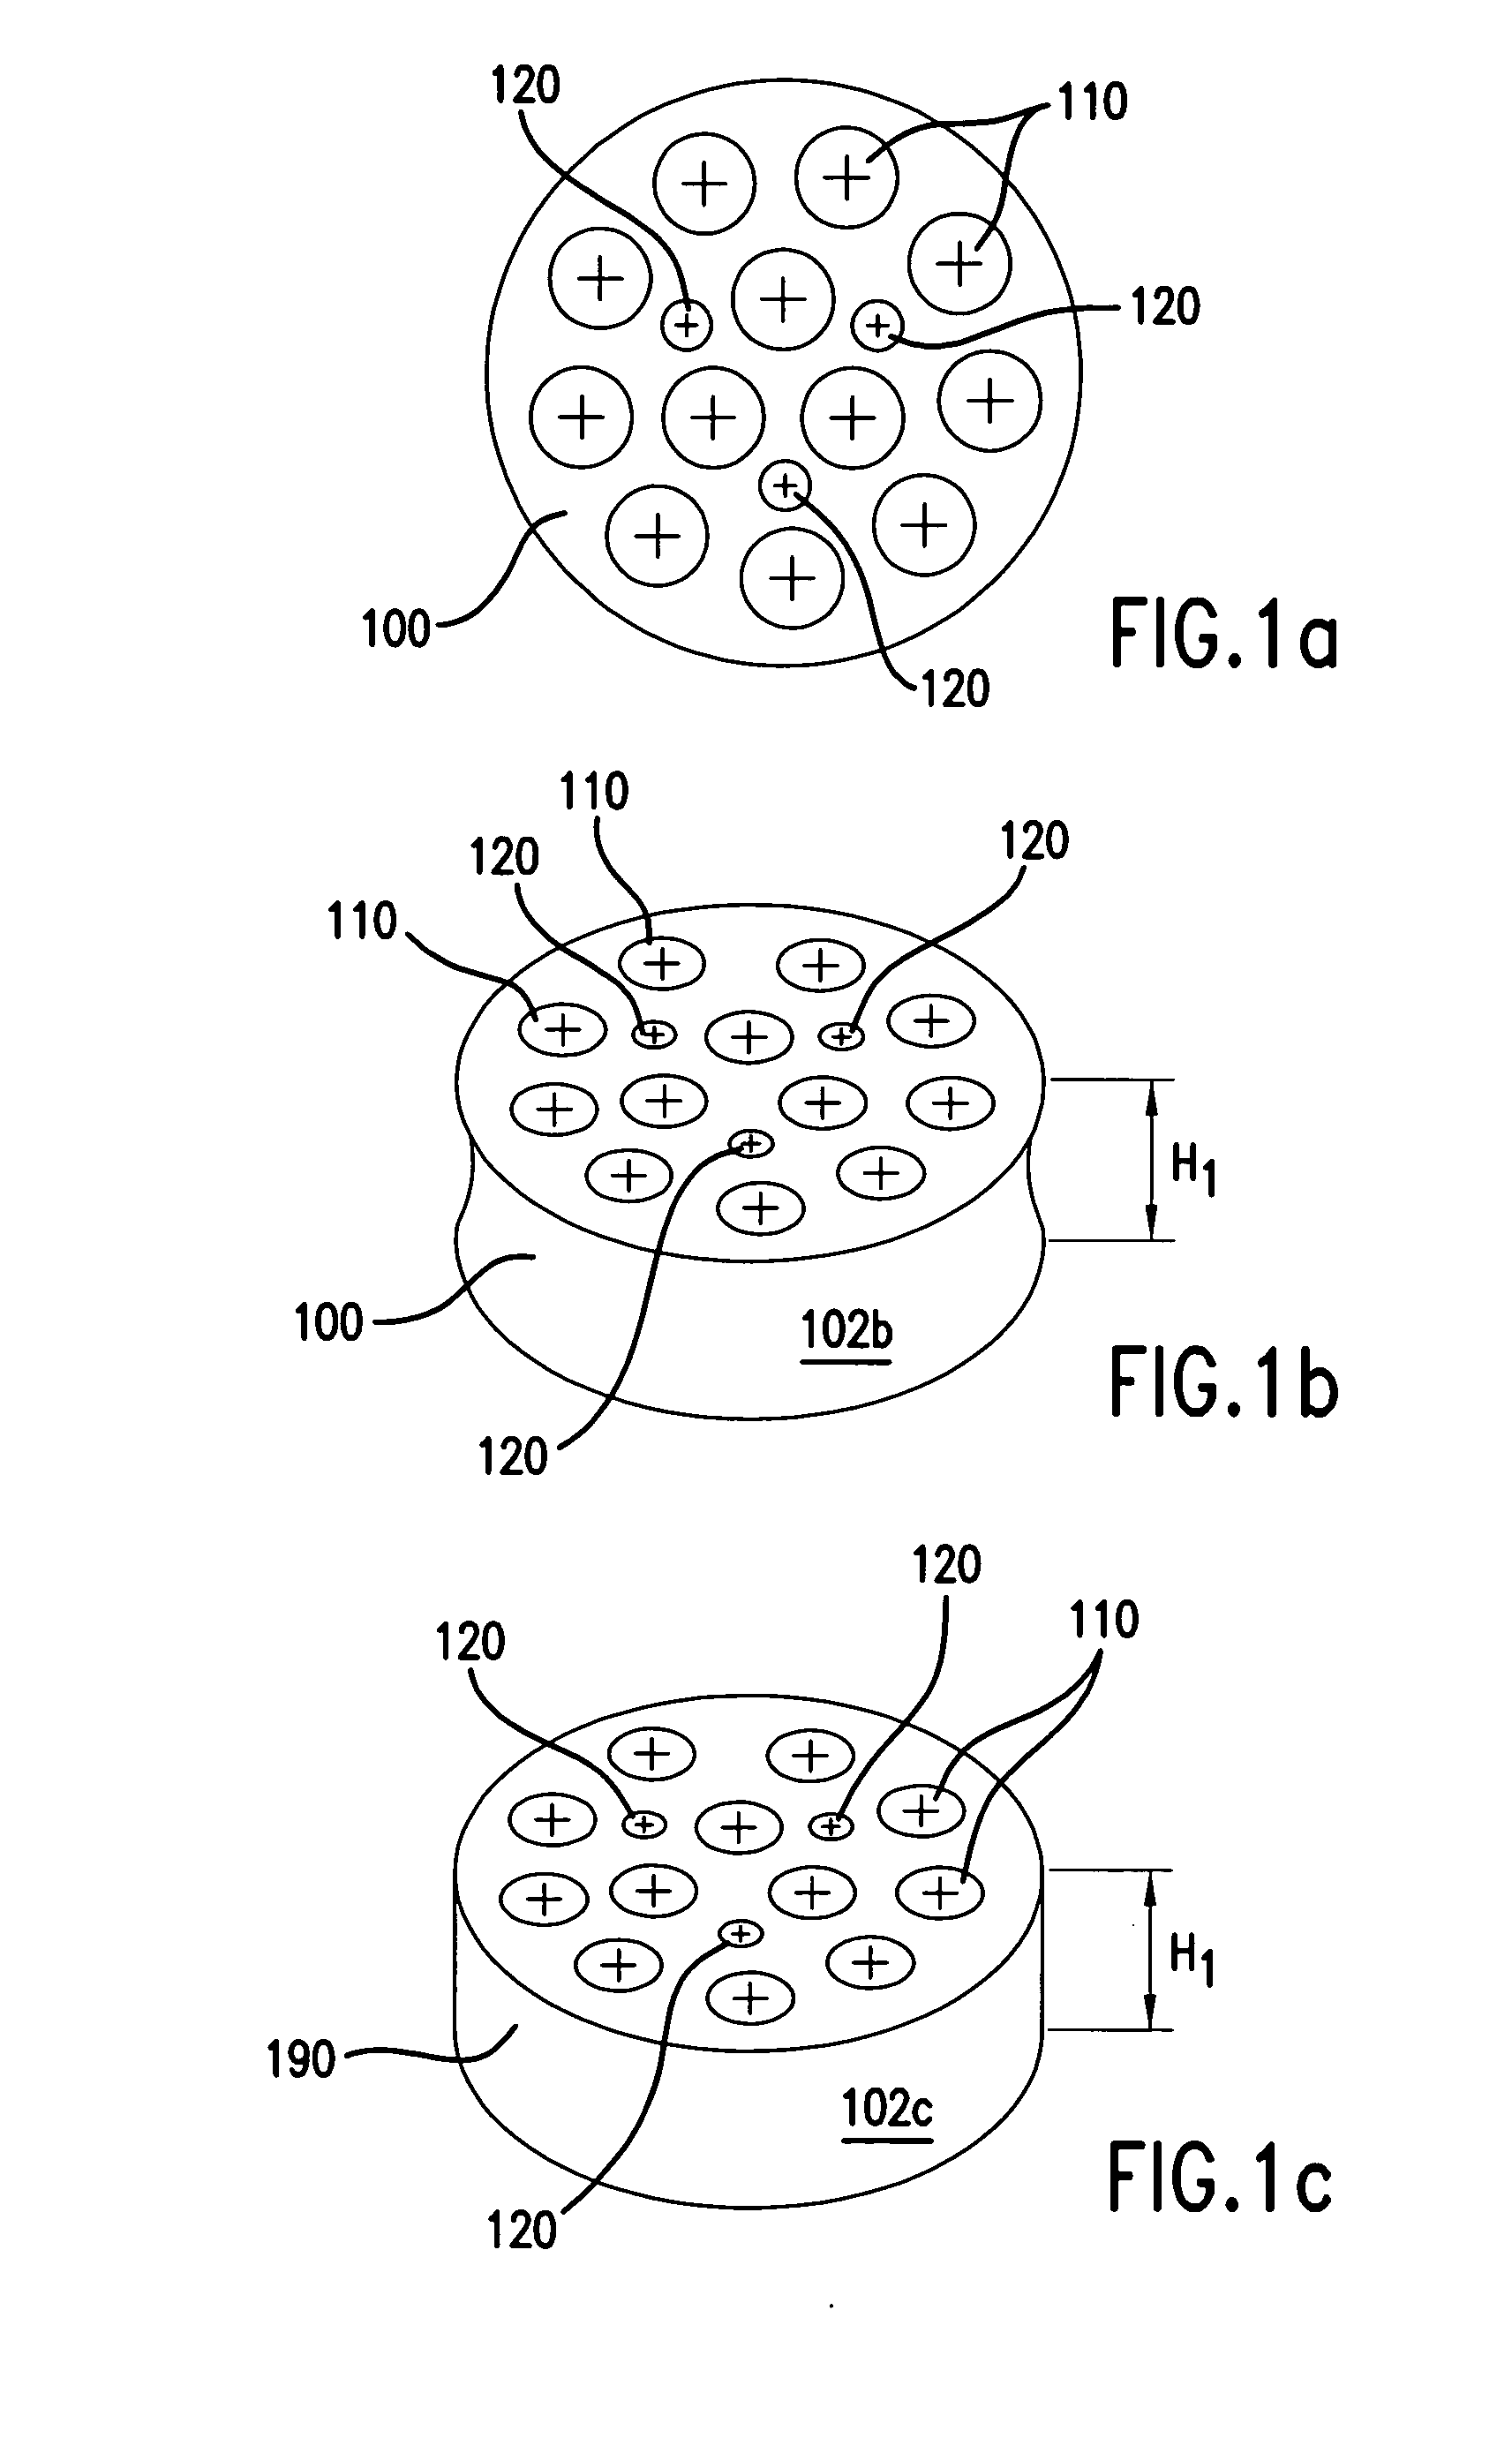 Method and apparatus for packaging horticultural products